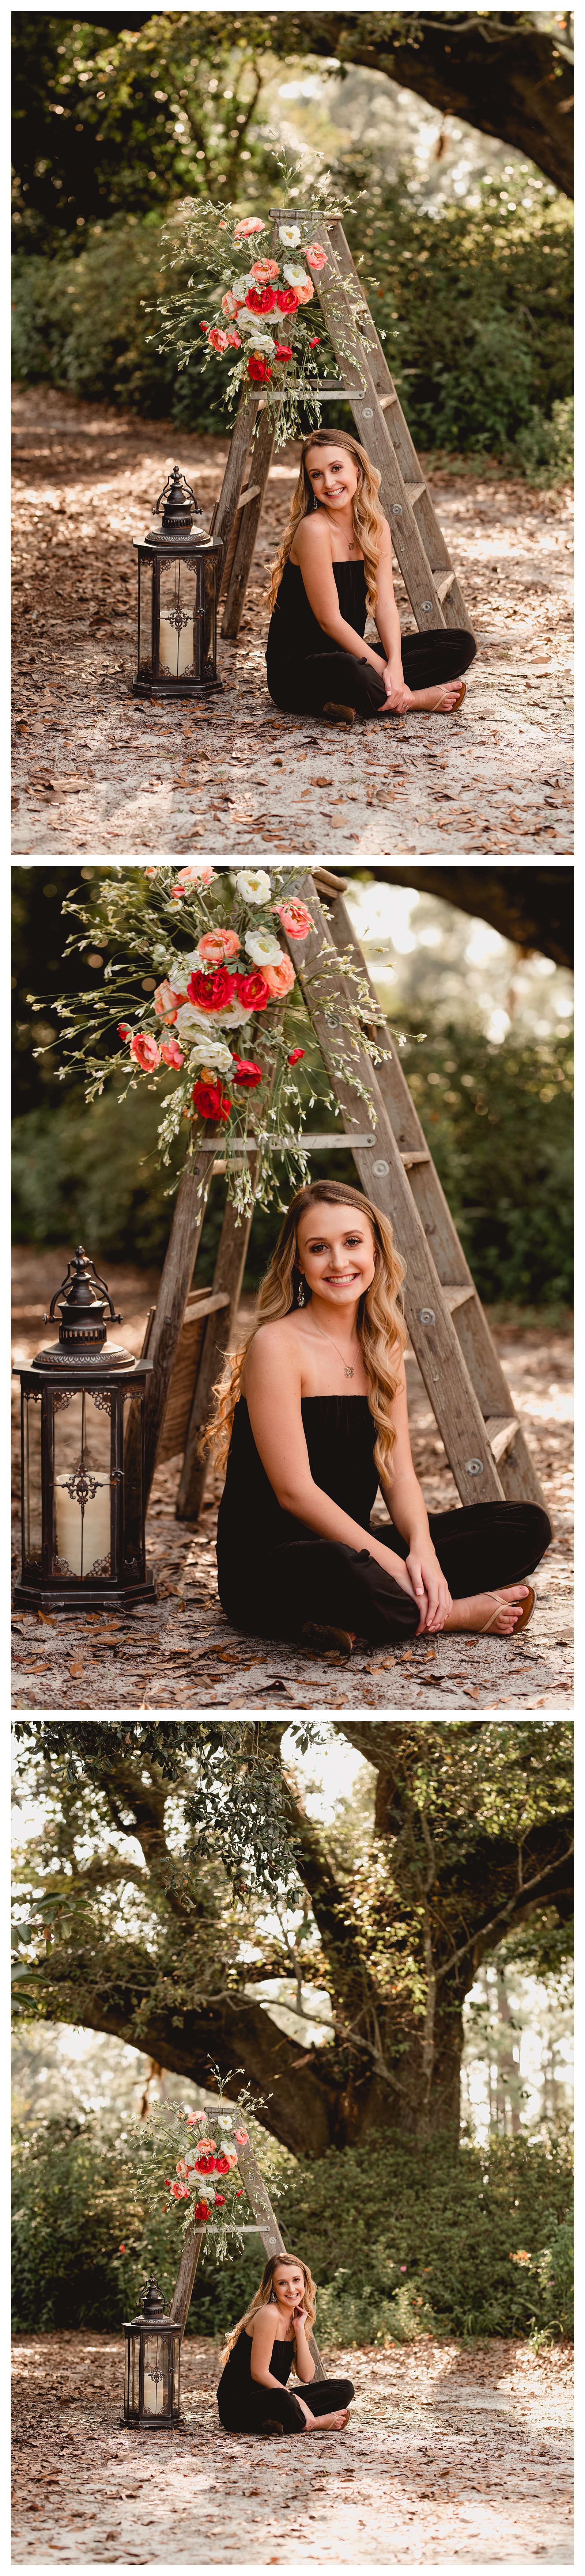 Floral ladder decoration in senior pictures in North Florida. Shelly Williams Photography